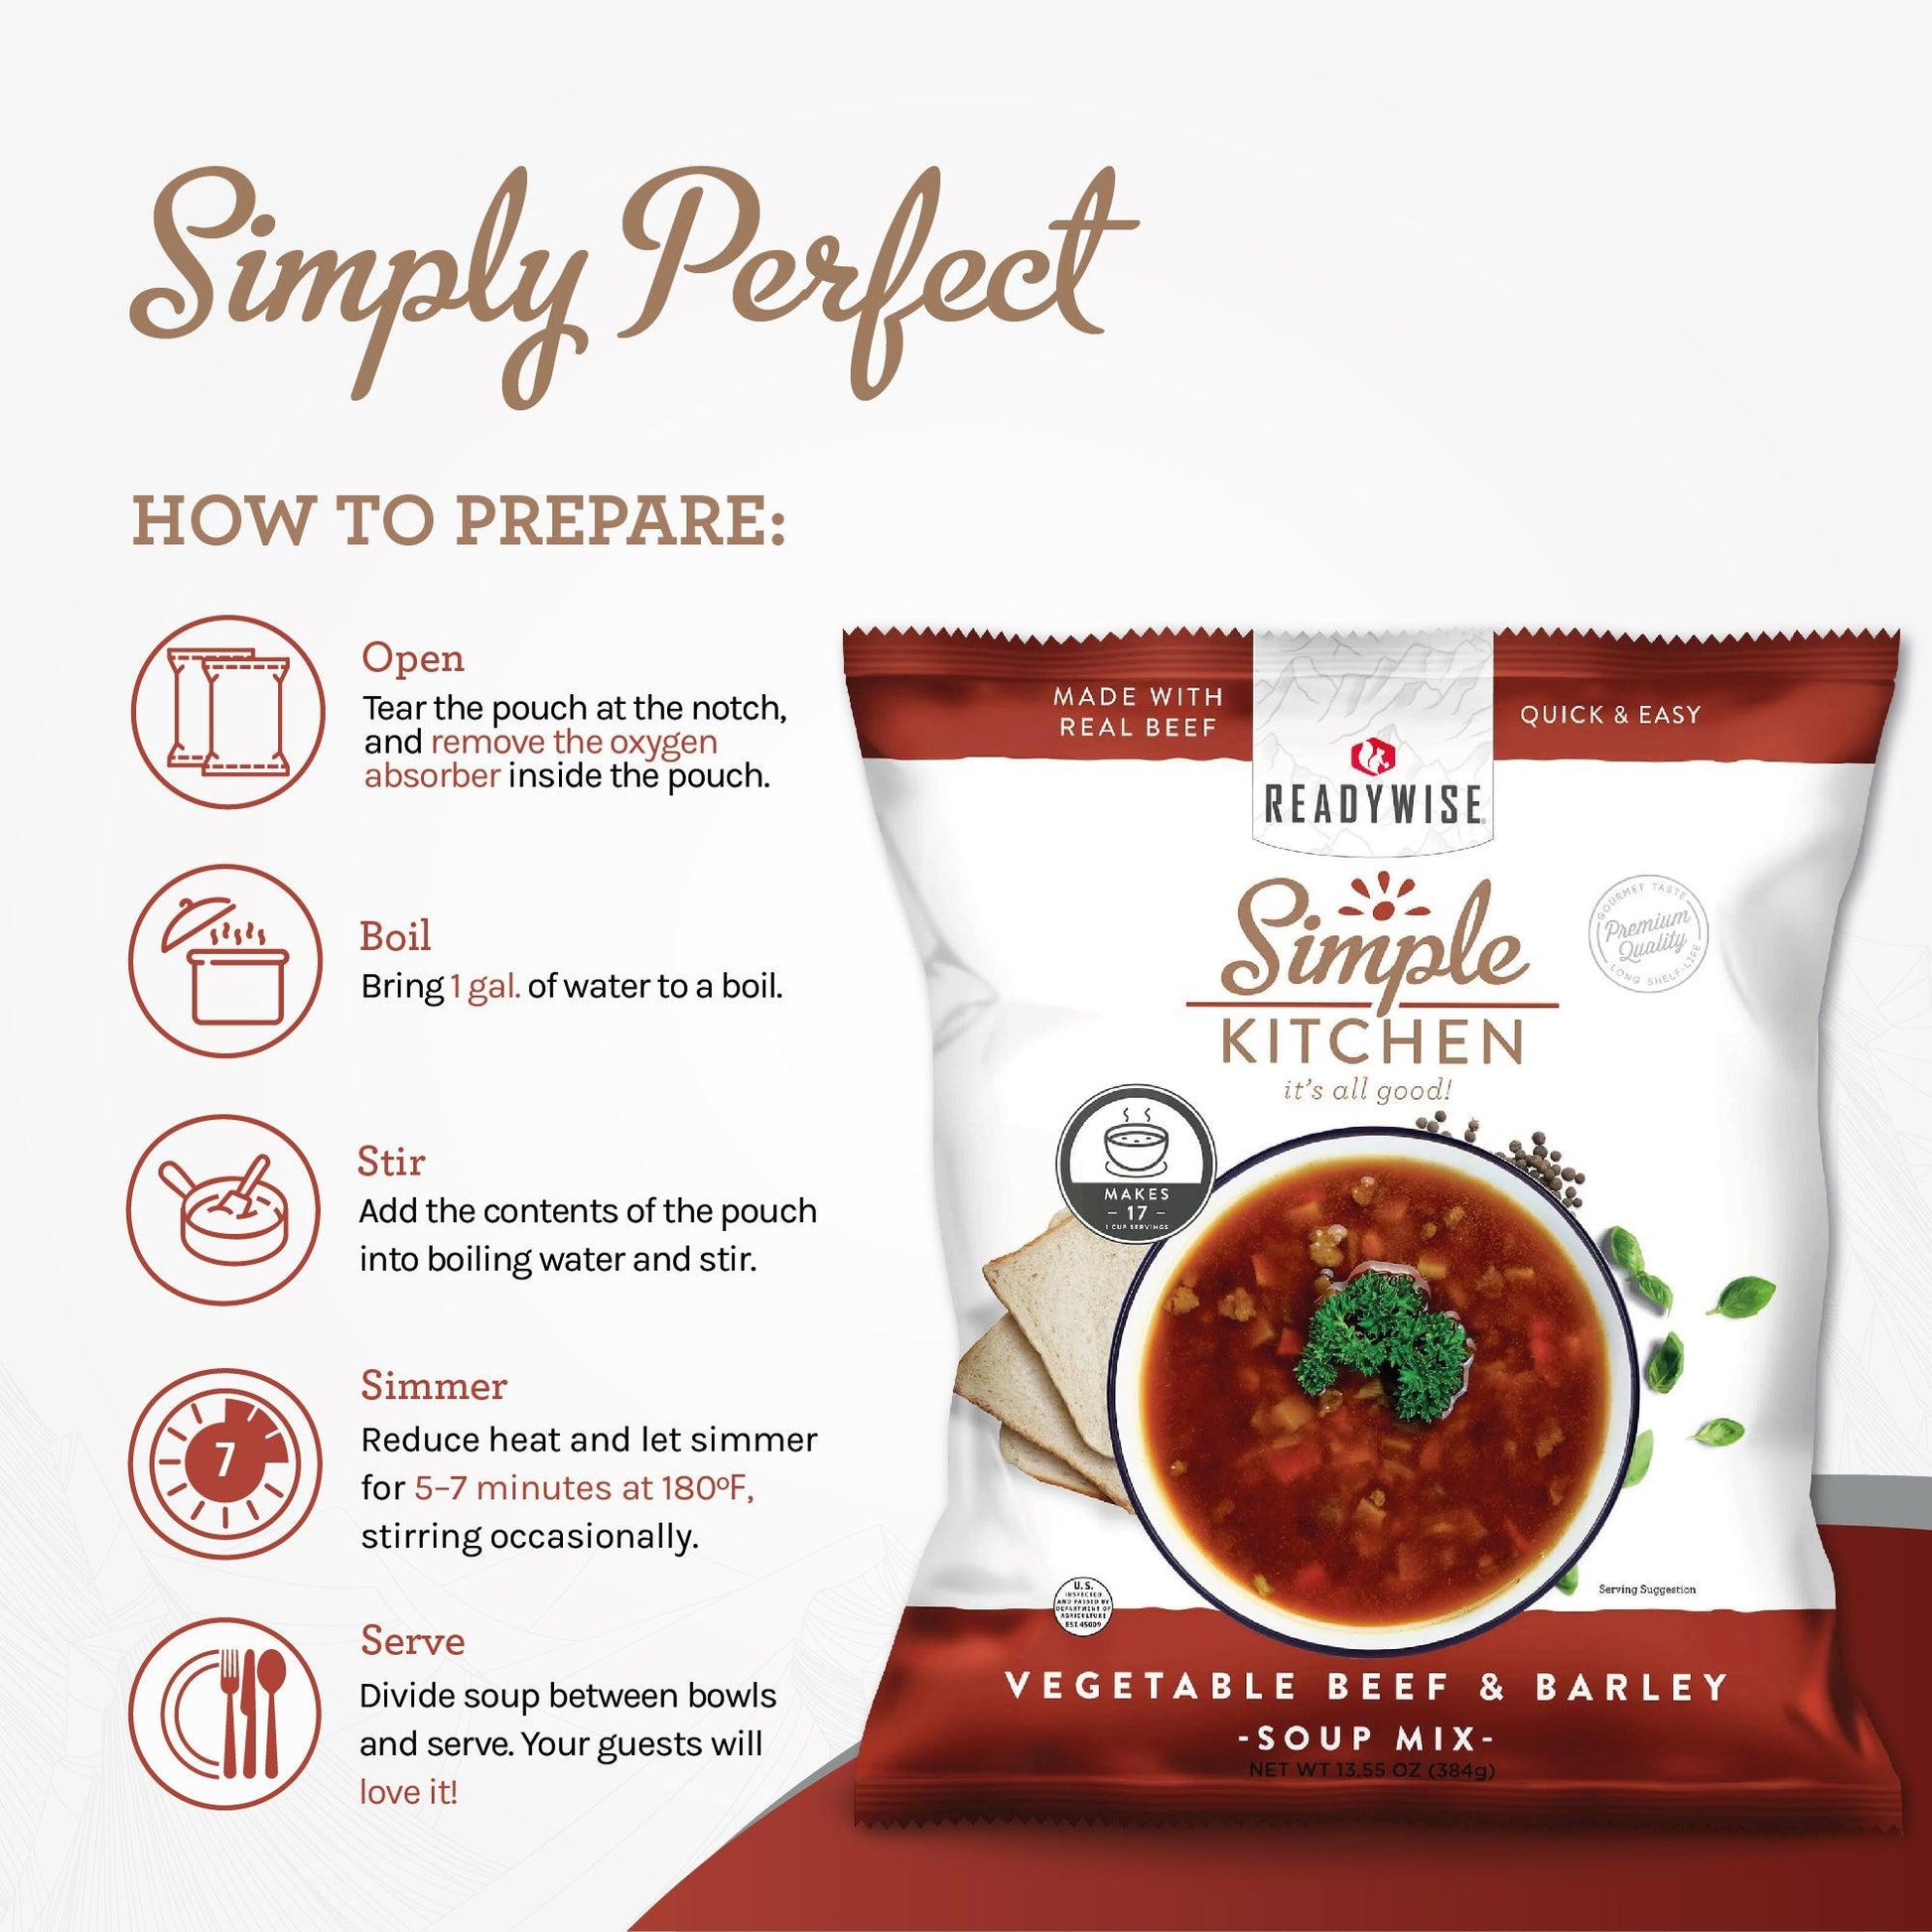 Vegetable Beef & Barley Soup Mix - 17 Servings per Pouch - Simple Kitchen Foods